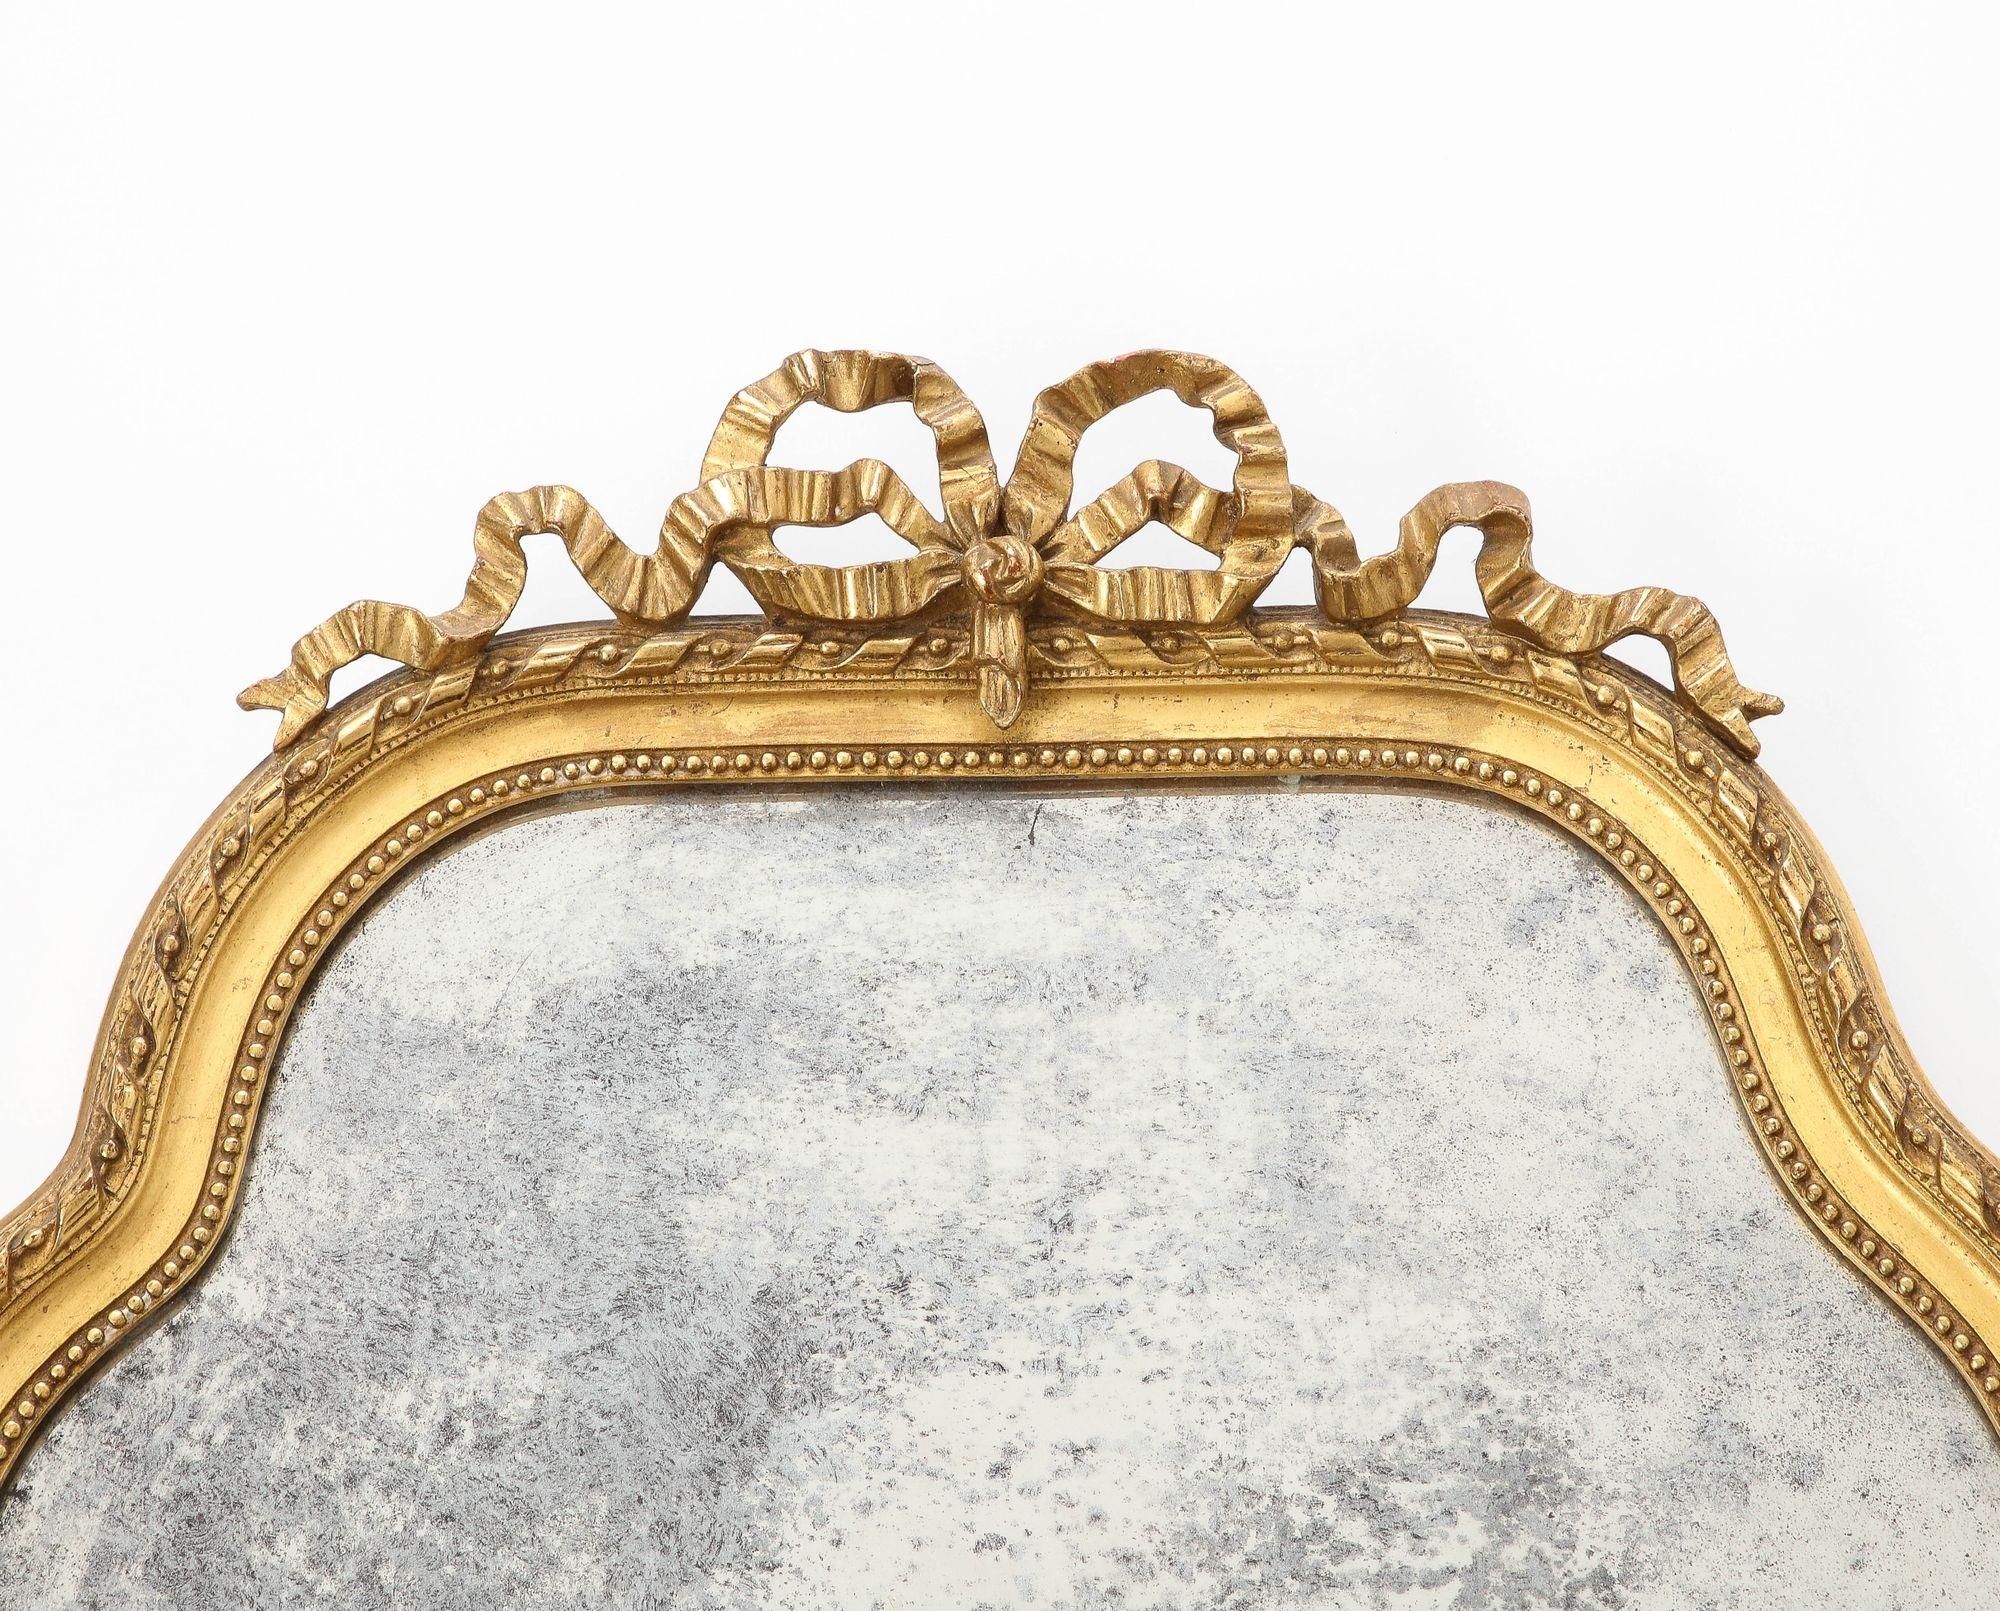 A 19th century small giltwood mirror with a bow crown. The lozenge-shaped wood frame features a beaded border. The glass plate has a heavy patina, highly desired by collectors. The back of the frame features a label from Adolphe Braun. Braun was a